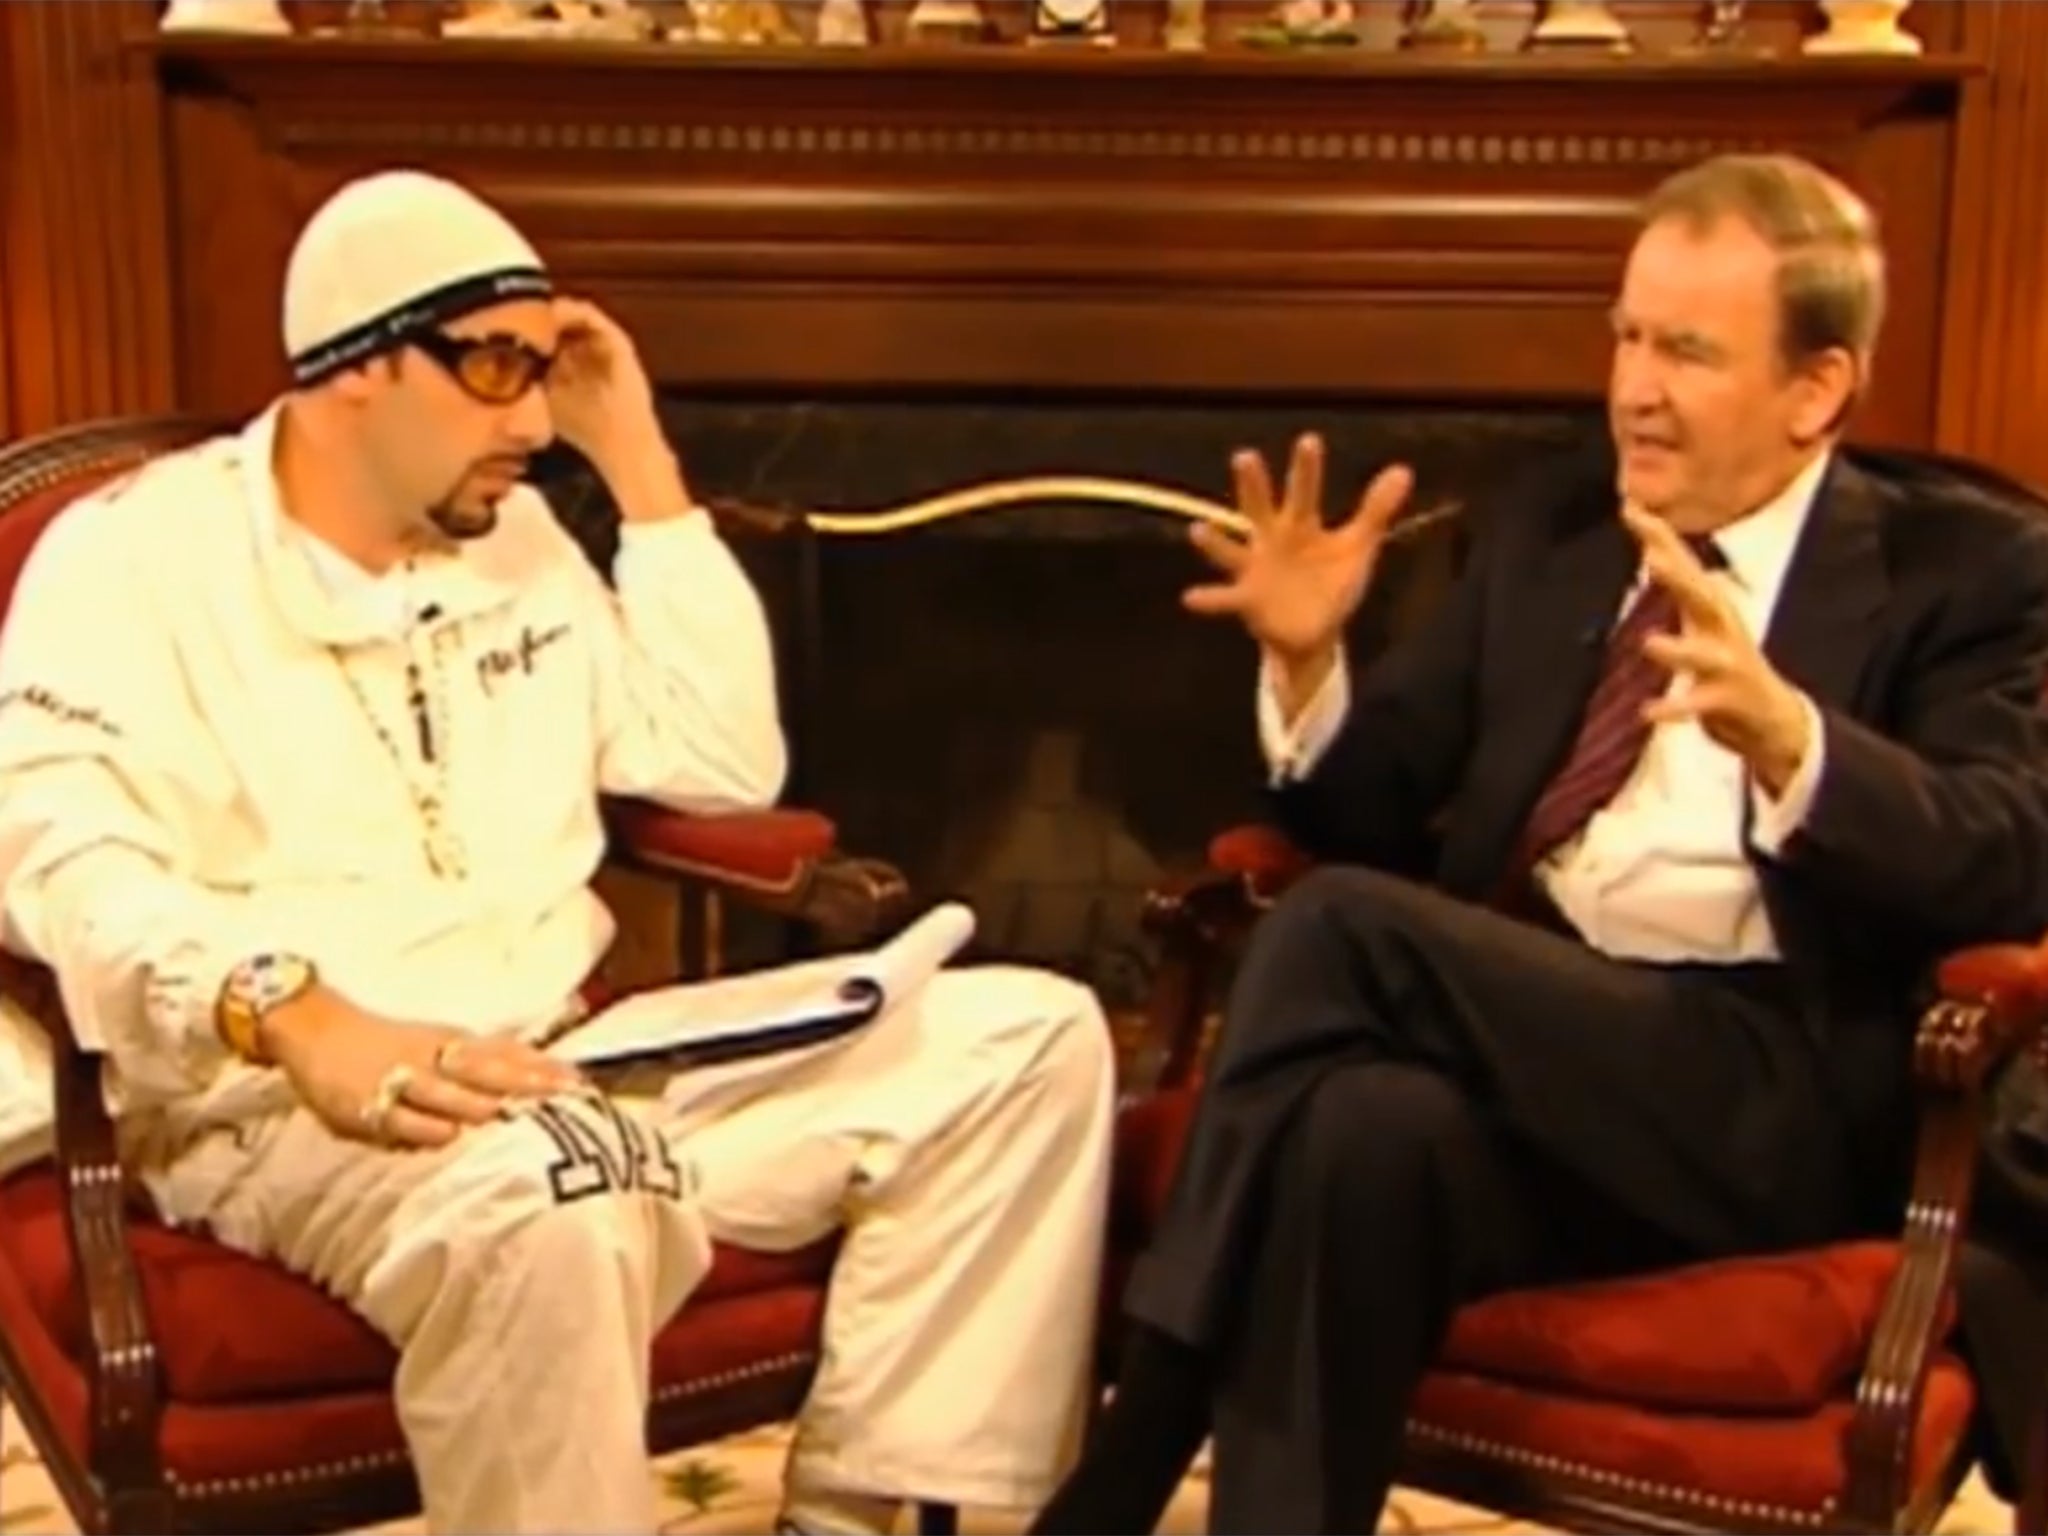 Ali G confused sandwiches with weapons of mass destruction in his interview with Pat Buchanan